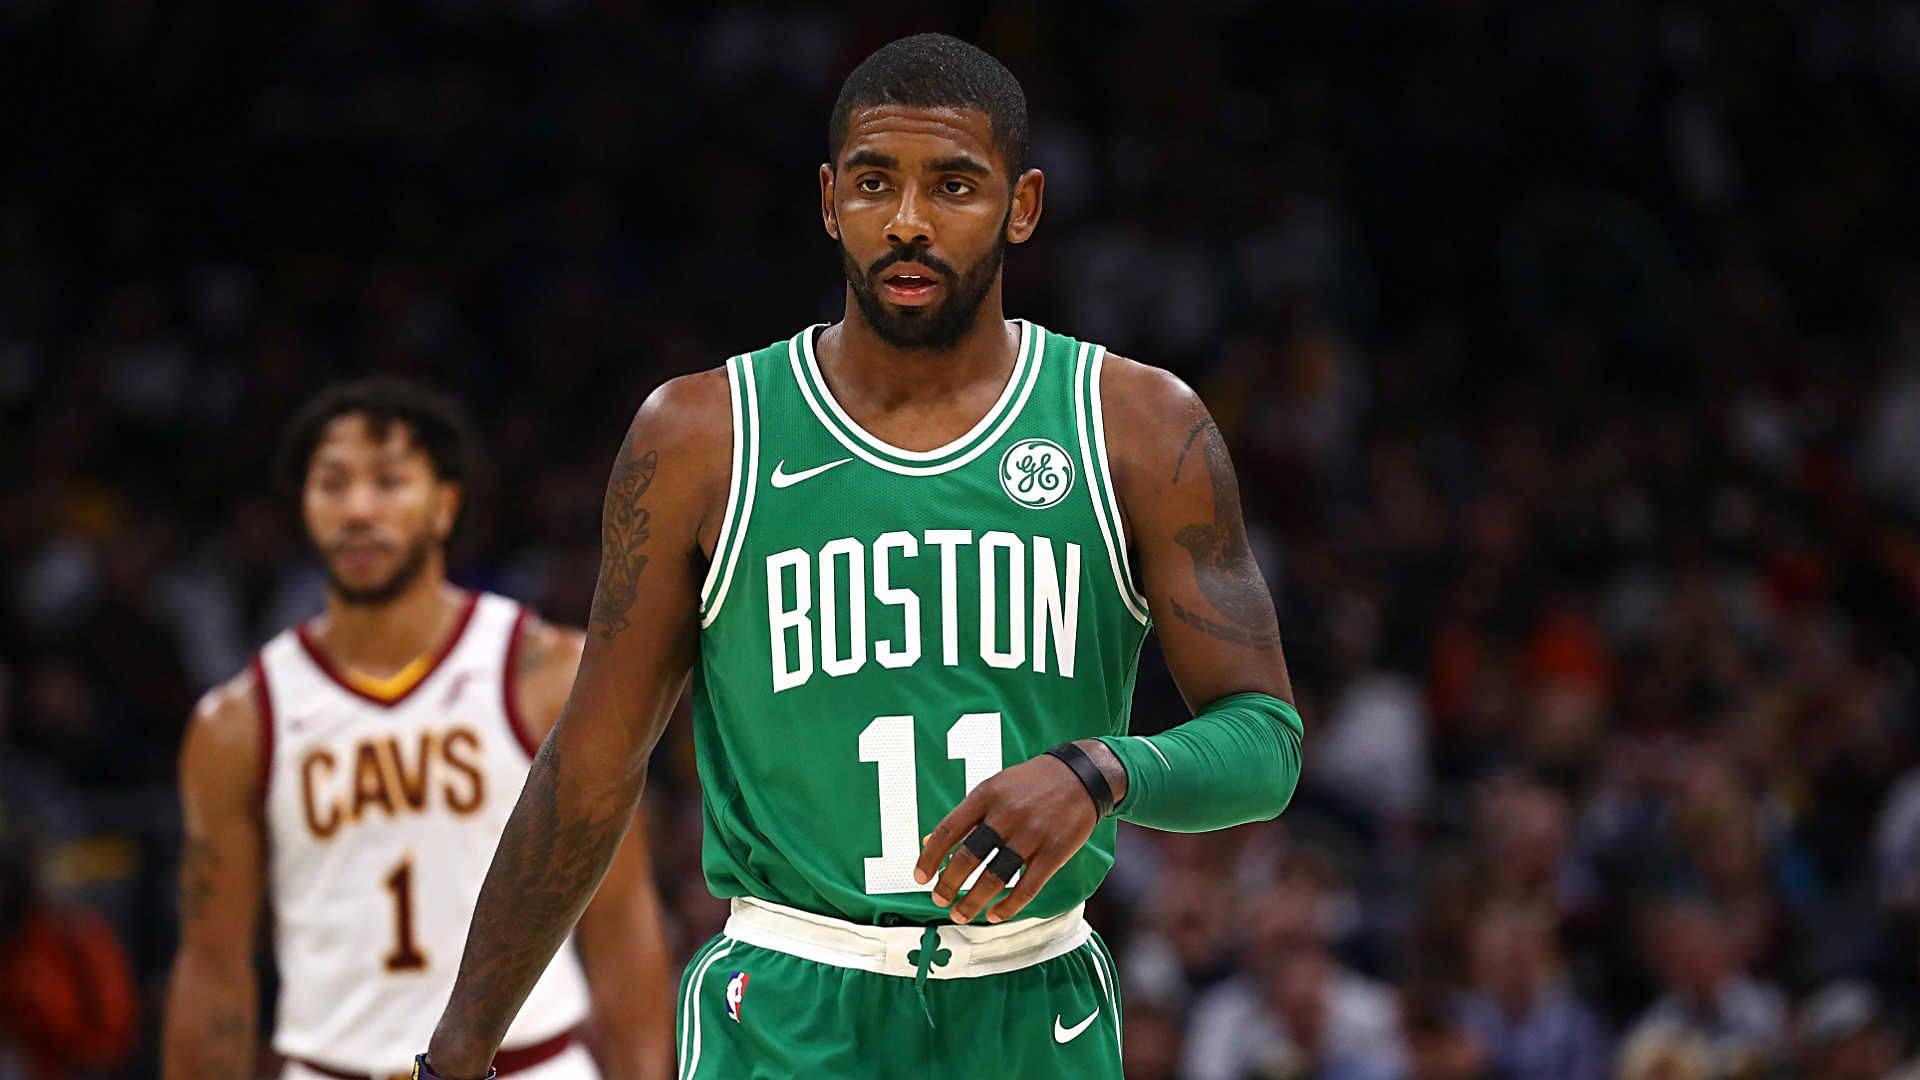 Kyrie Irving Boston And Cavaliers Wallpaper